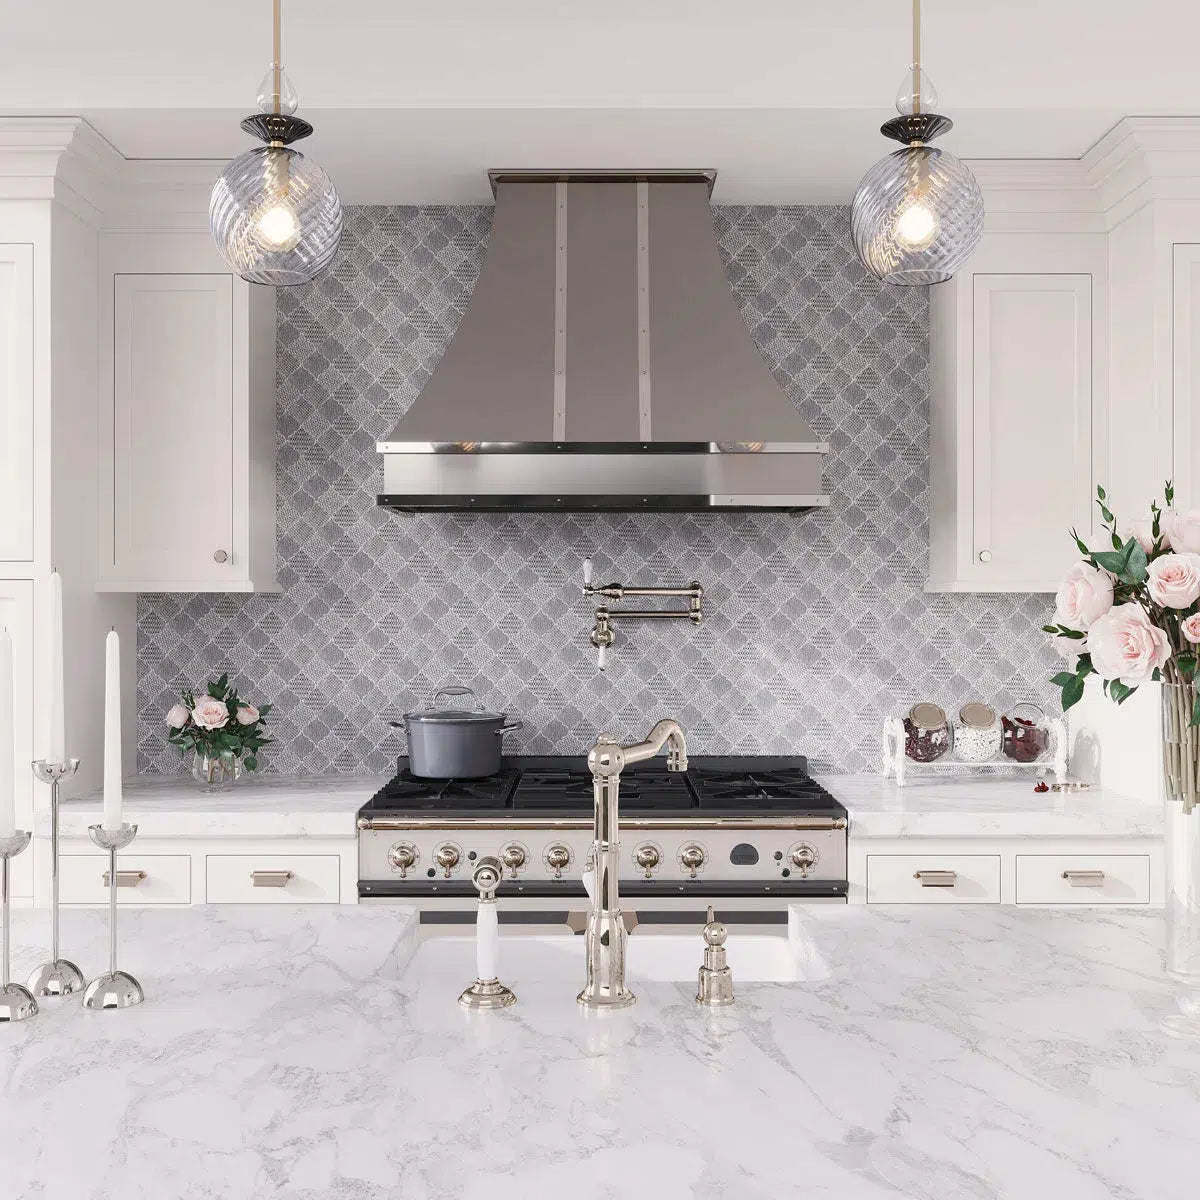 White and silver kitchen with etched marble arabesque backsplash tile and brushed nickel hood range